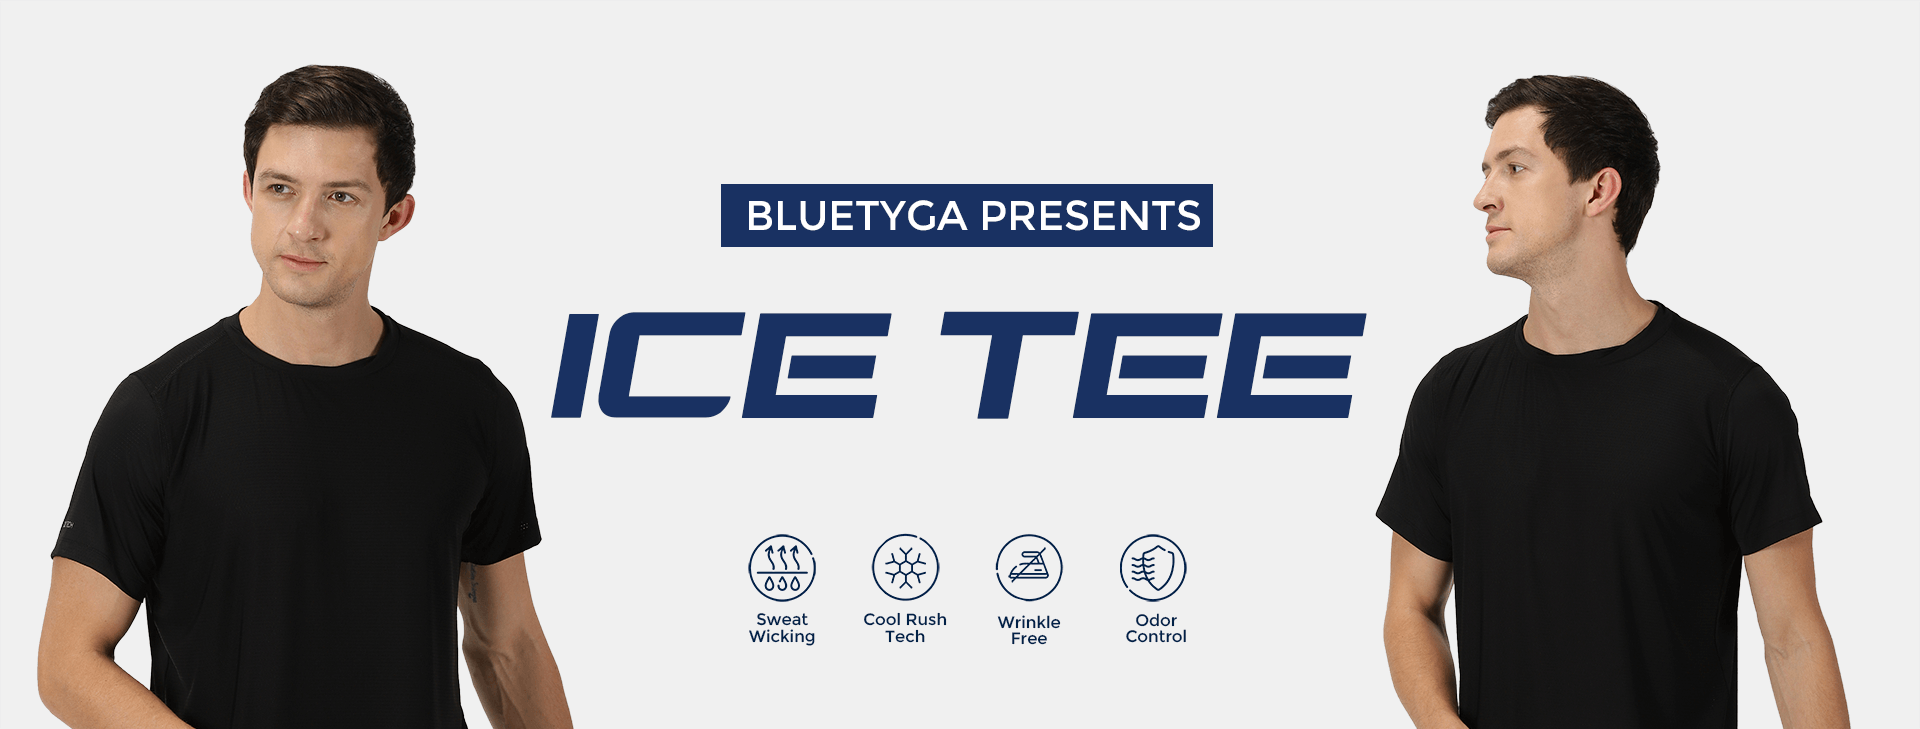 Promotional banner for Bluetyga ICE TEE, featuring a male model wearing a black performance t-shirt with sweat-wicking, cool rush tech, wrinkle-free, and odor control features, displayed with symbols representing each technology.